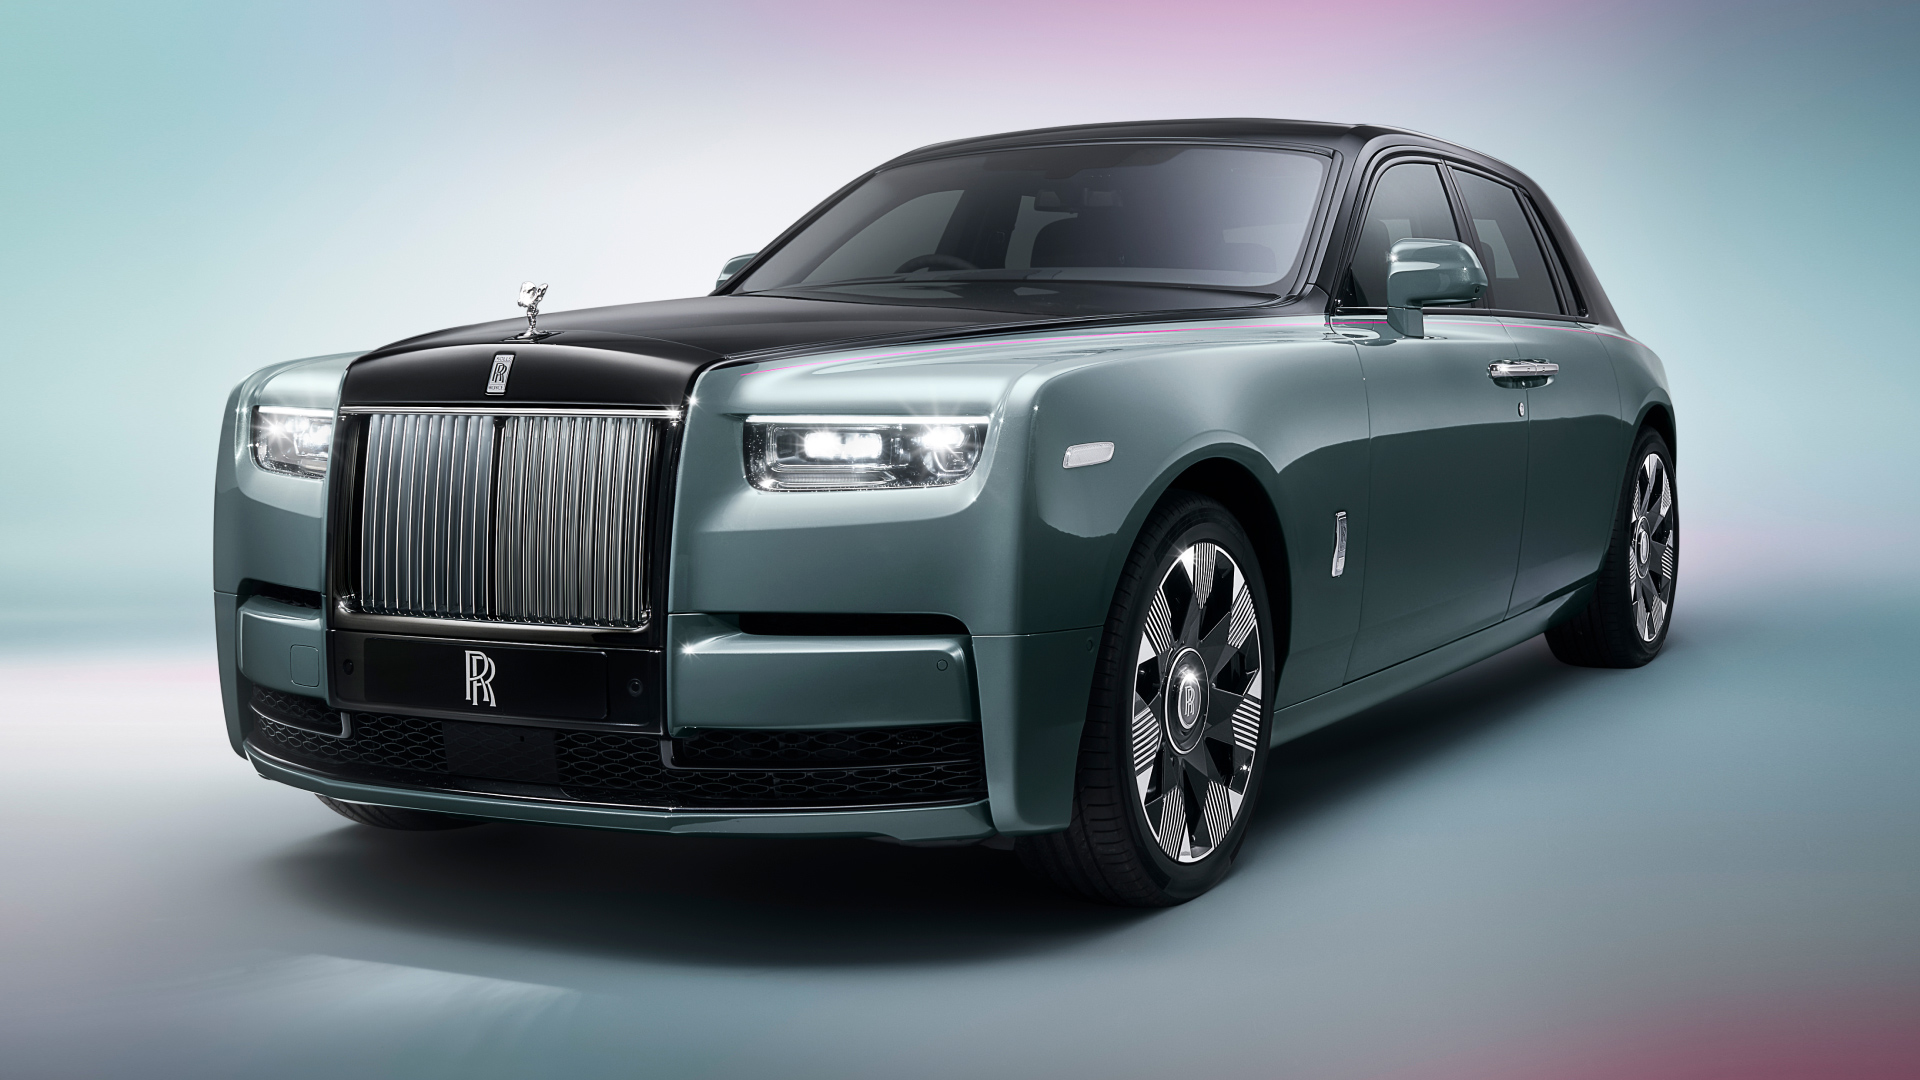 The £370,000 Rolls-Royce is one of Pacino's most expensive car